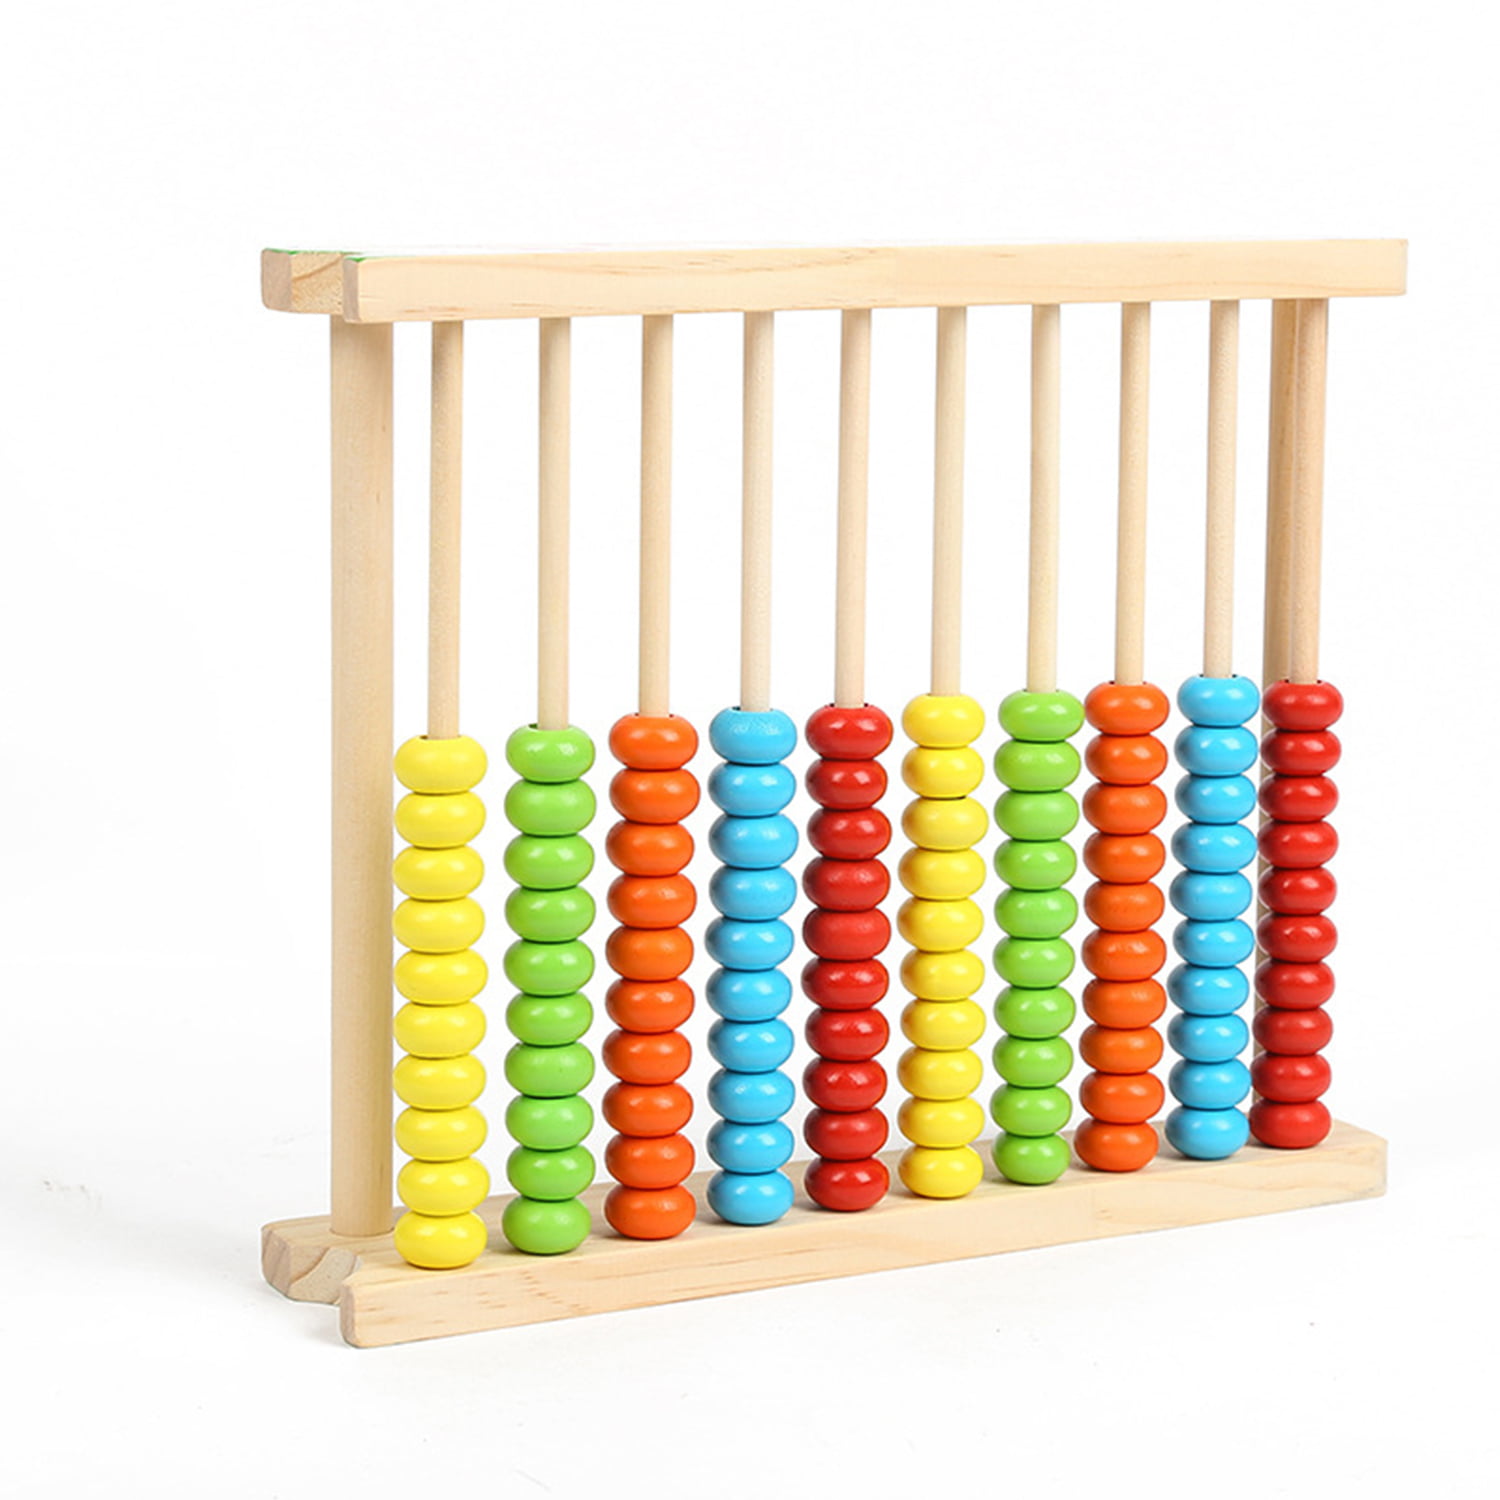 Childrens Wooden Bead Abacus Counting Frame Kid Educational Maths Toy X-mas Gift 